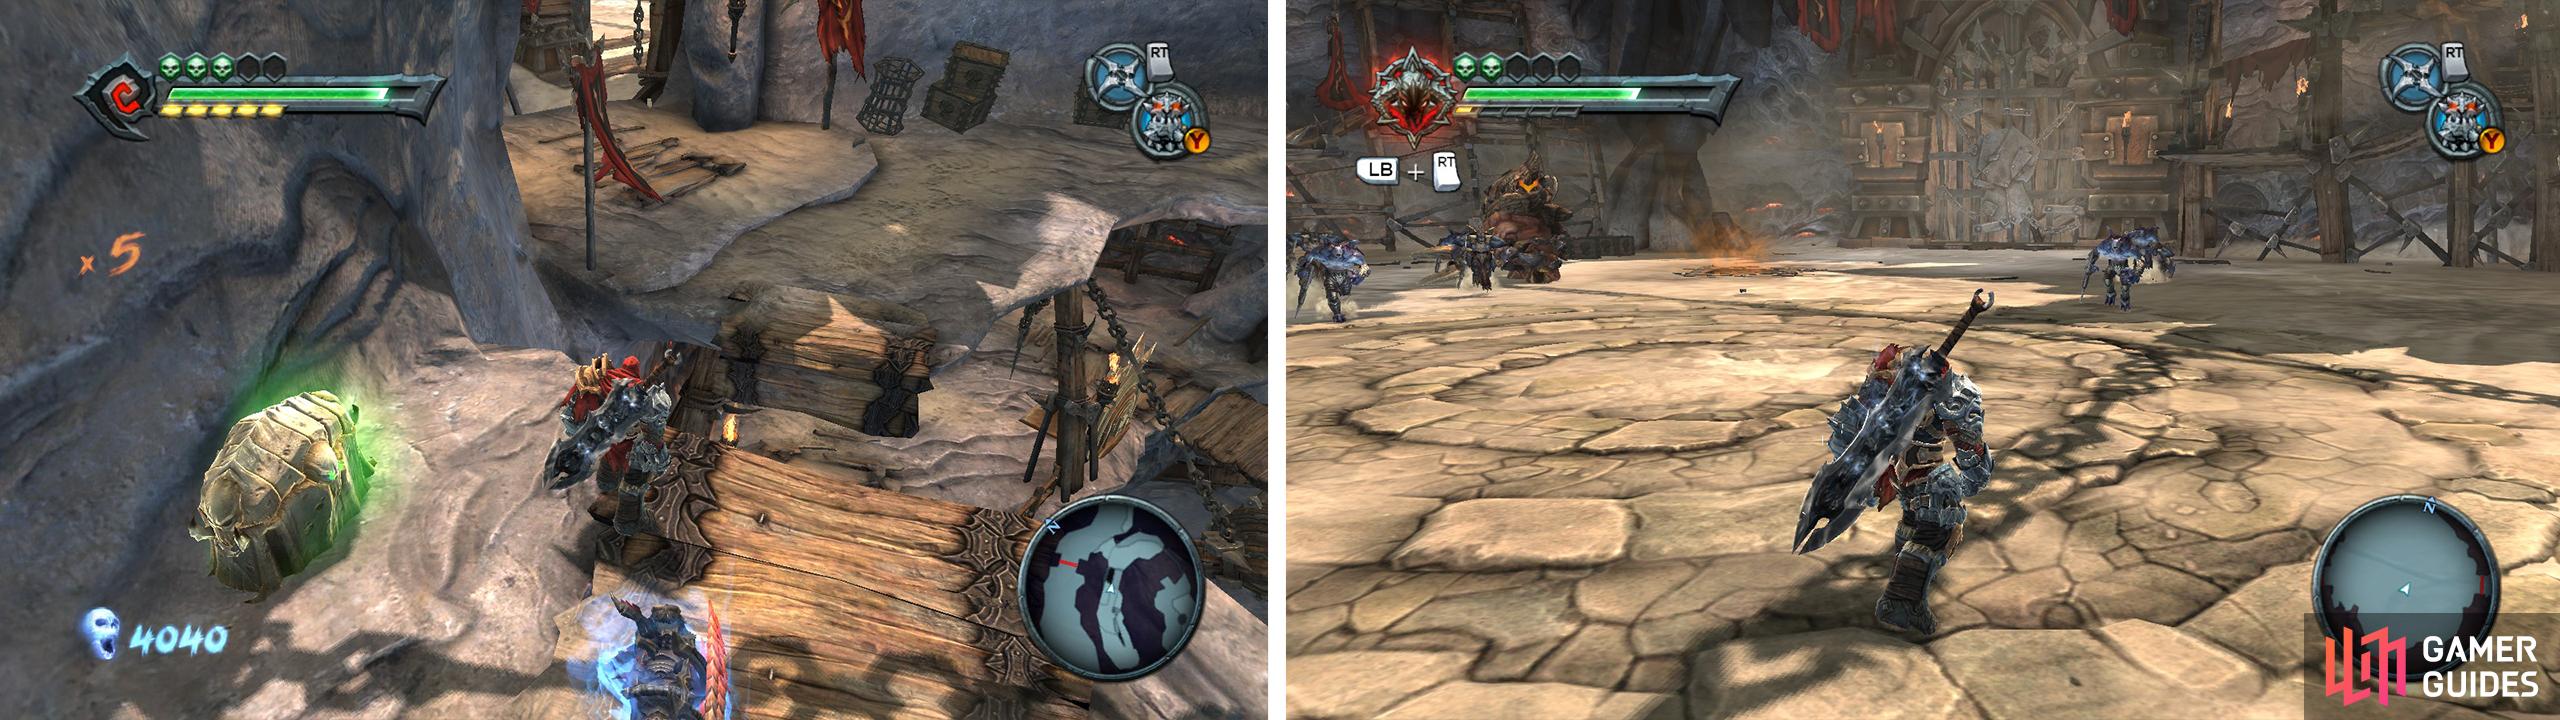 Hop across the gap (left) to enter an Arena area where youll need to fight enemies (right).